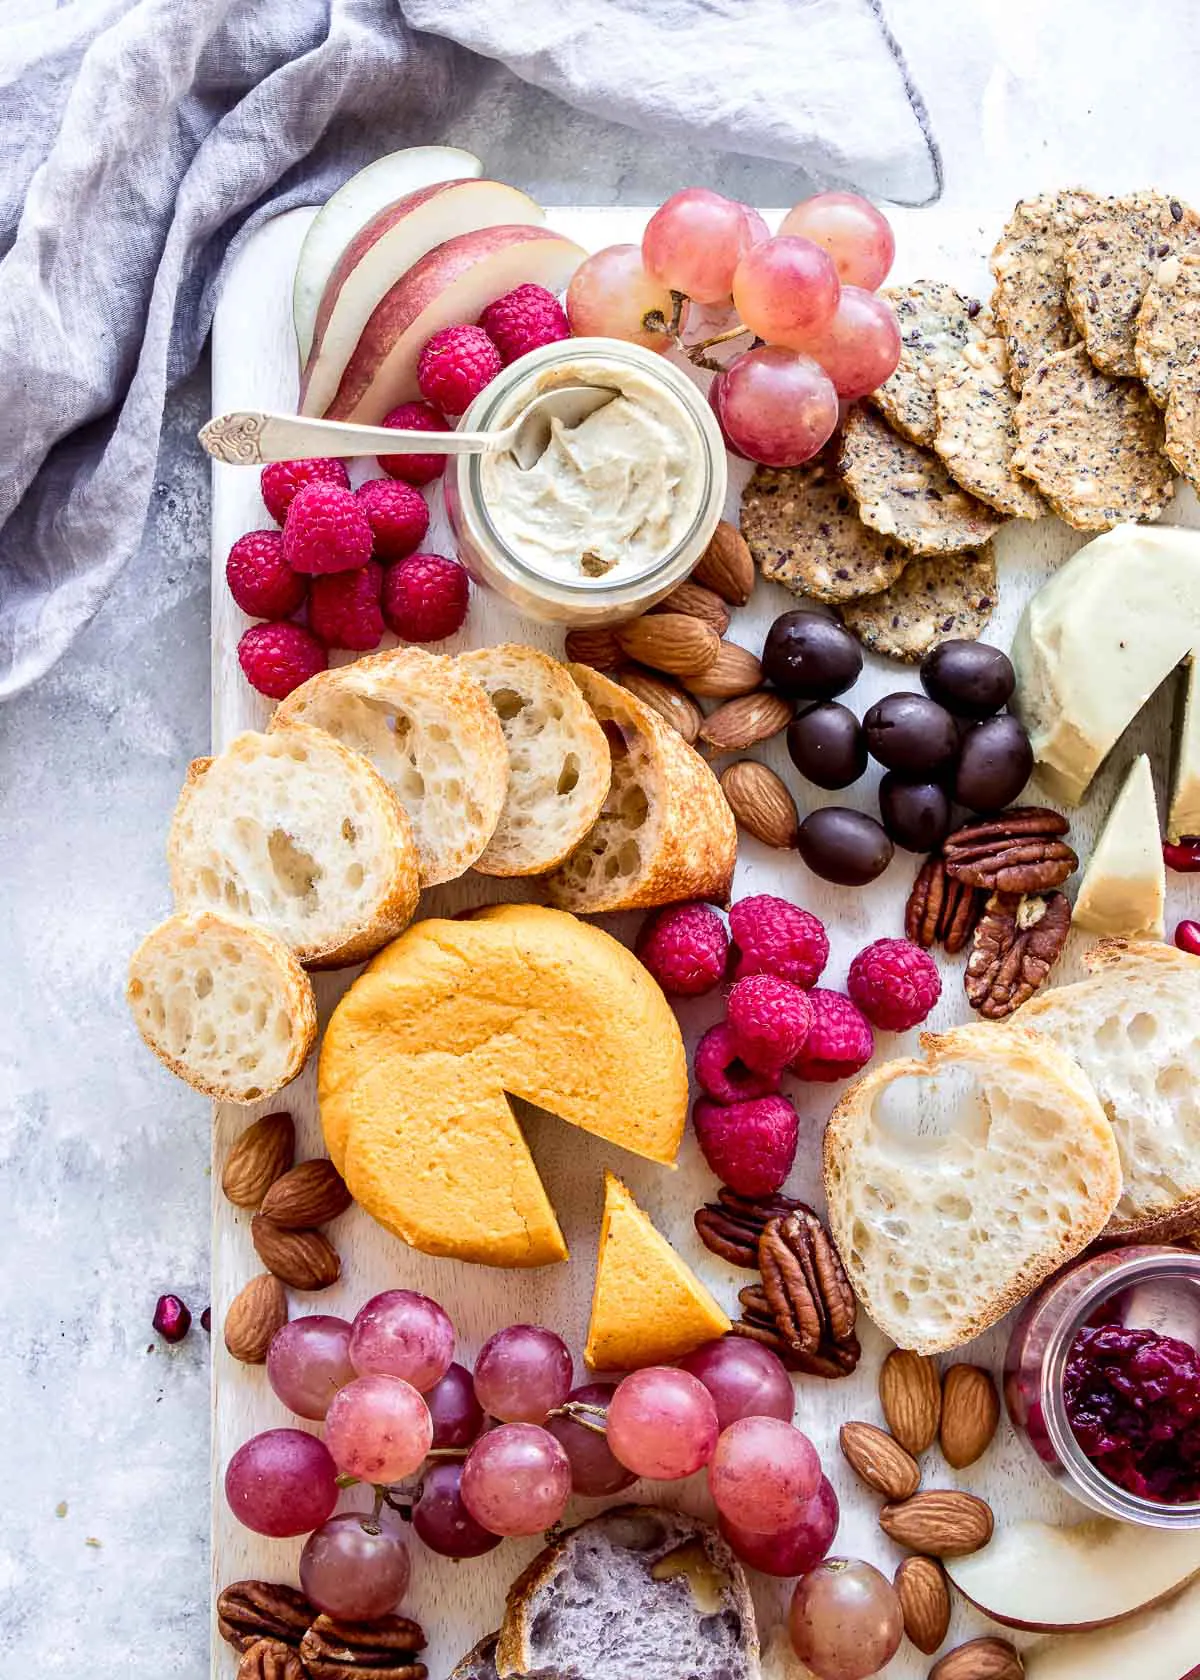 Vegan charcuterie board with cheeses, berries, bread and crackers.